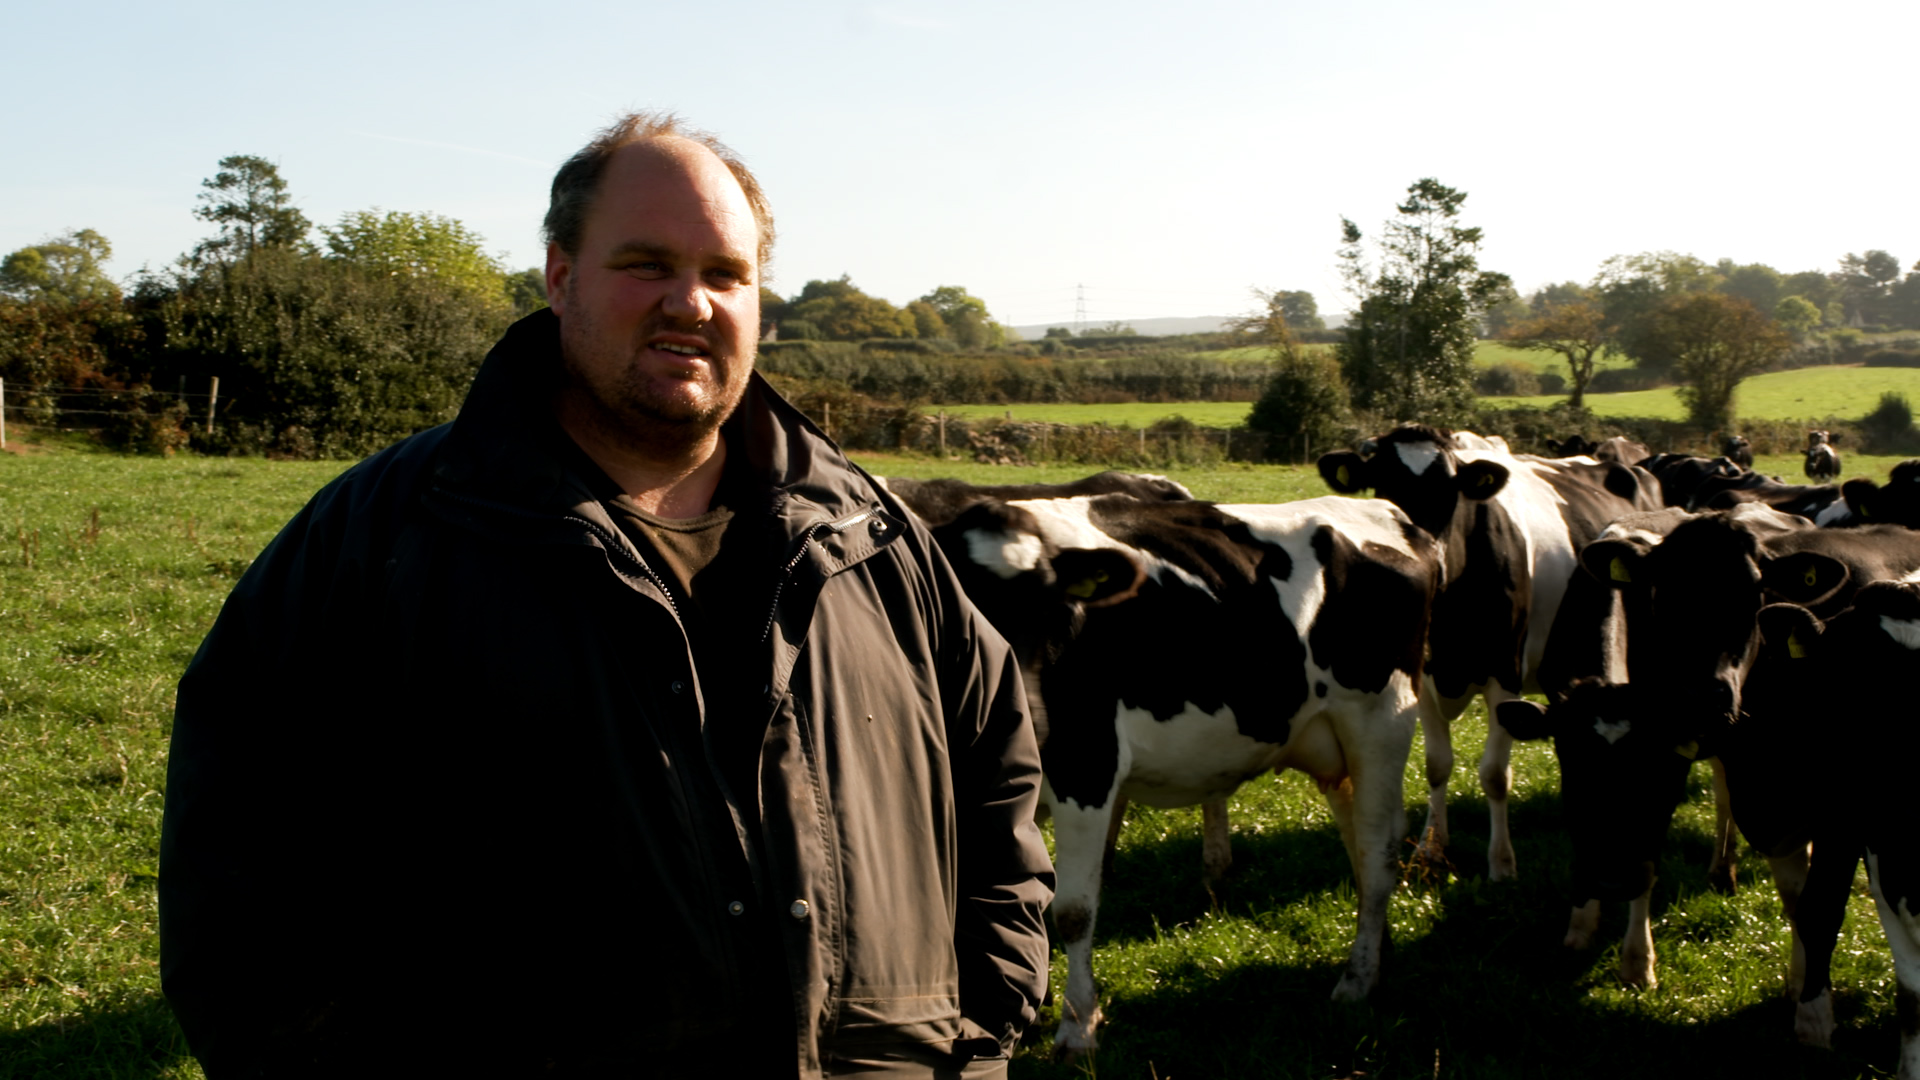 The emotional impact of an explosive TB breakdown | Somerset dairy farmer Andrew Urch and his mother Susan have lost a total of 132 cows to TB. Watch the video and hear their story.